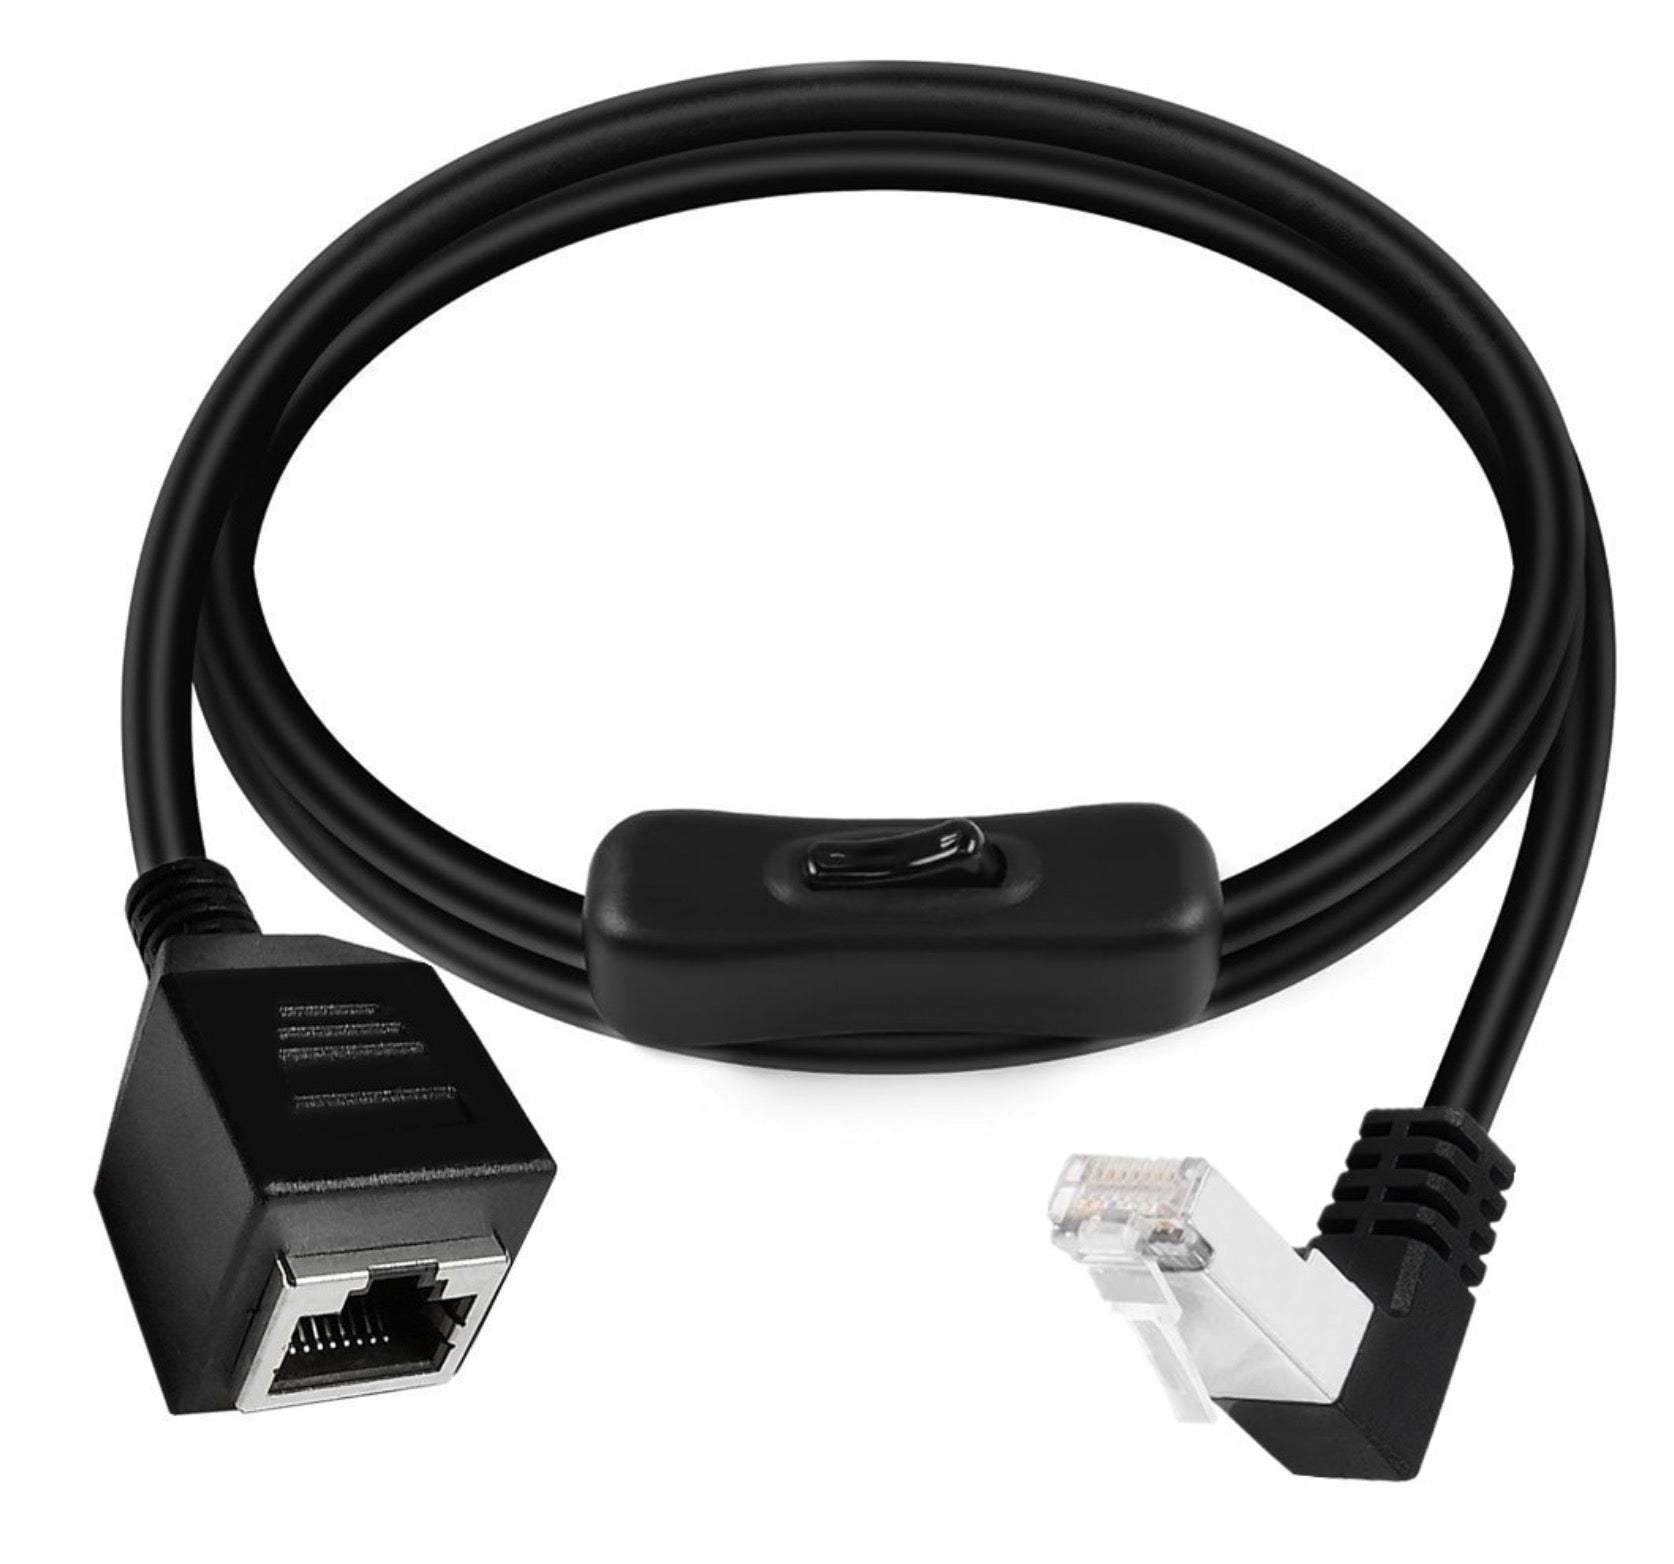 Cat6 Ethernet Patch Cable Switch On/Off RJ45 Male to Female High Speed Internet Network Cable LAN with Disconnect Switch Up Angle